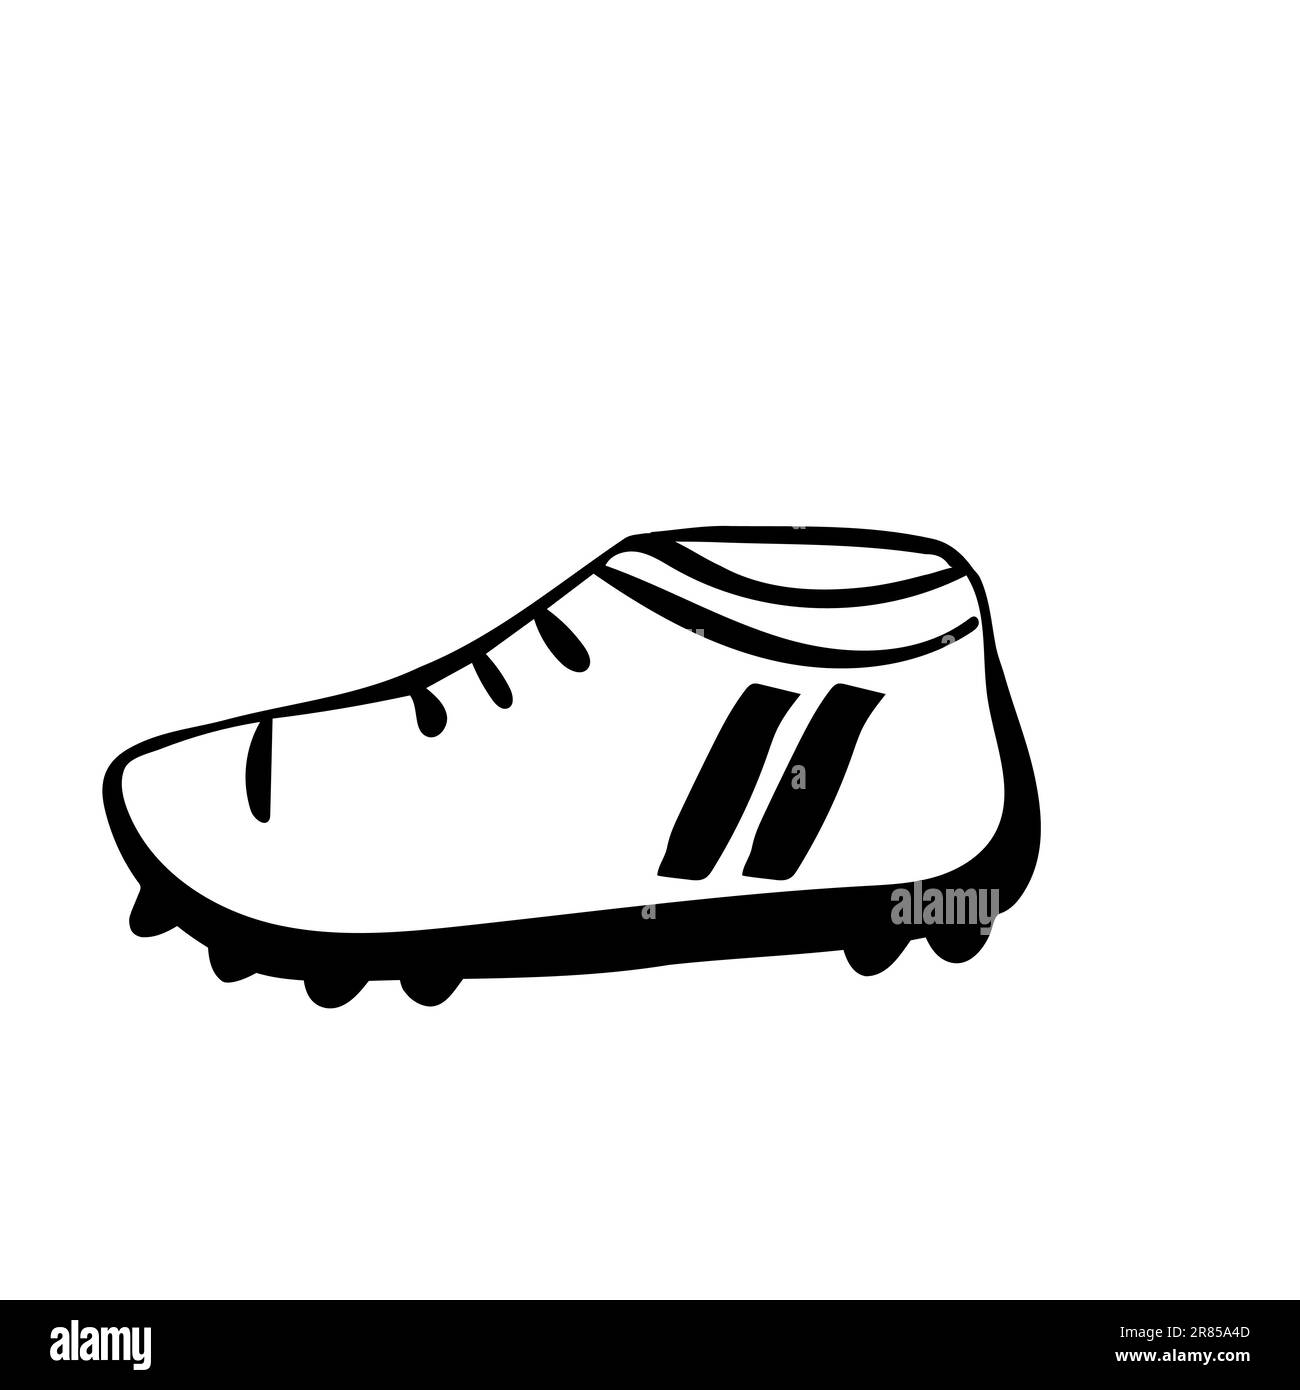 A vector illustration of soccer boots with studs for grip. Soccer boots. Football boots Stock Vector